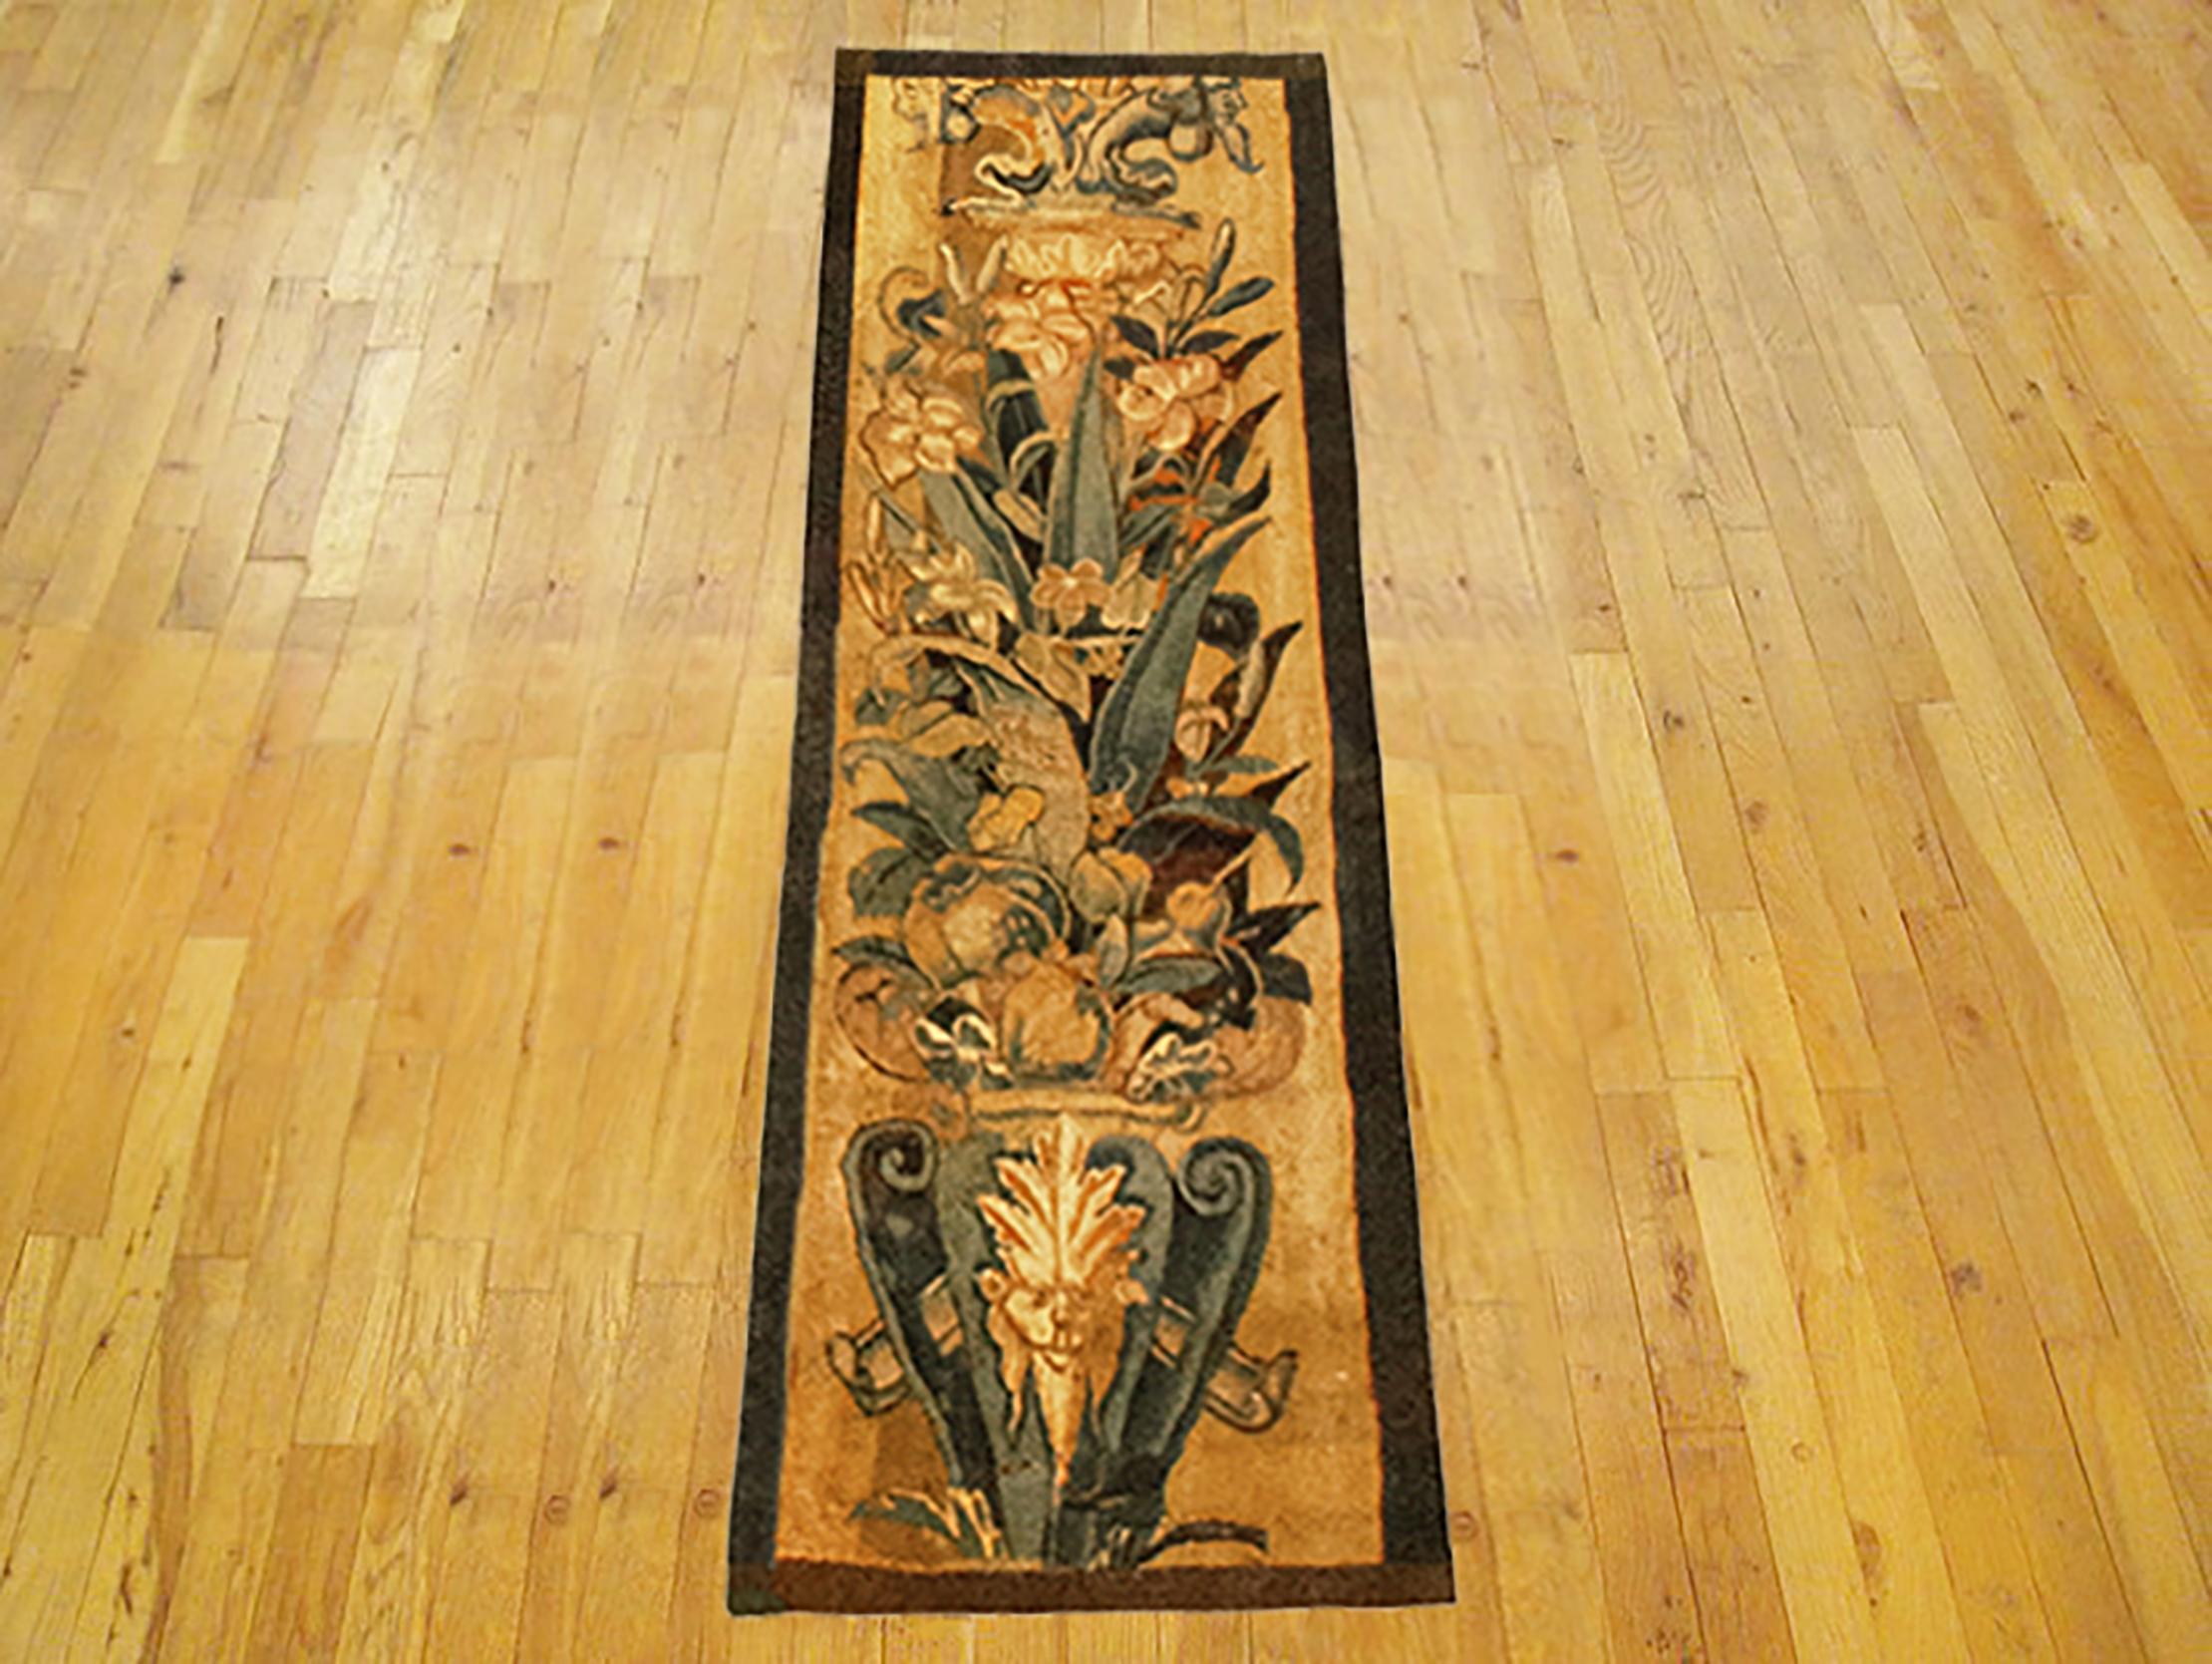 A 16th Century Brussels Historical Tapestry panel. This vertically oriented decorative tapestry panel depicts a scrolling foliate design, with a grotesque and a coat of arms at bottom, and with flowers and a vase above. The central area is enclosed